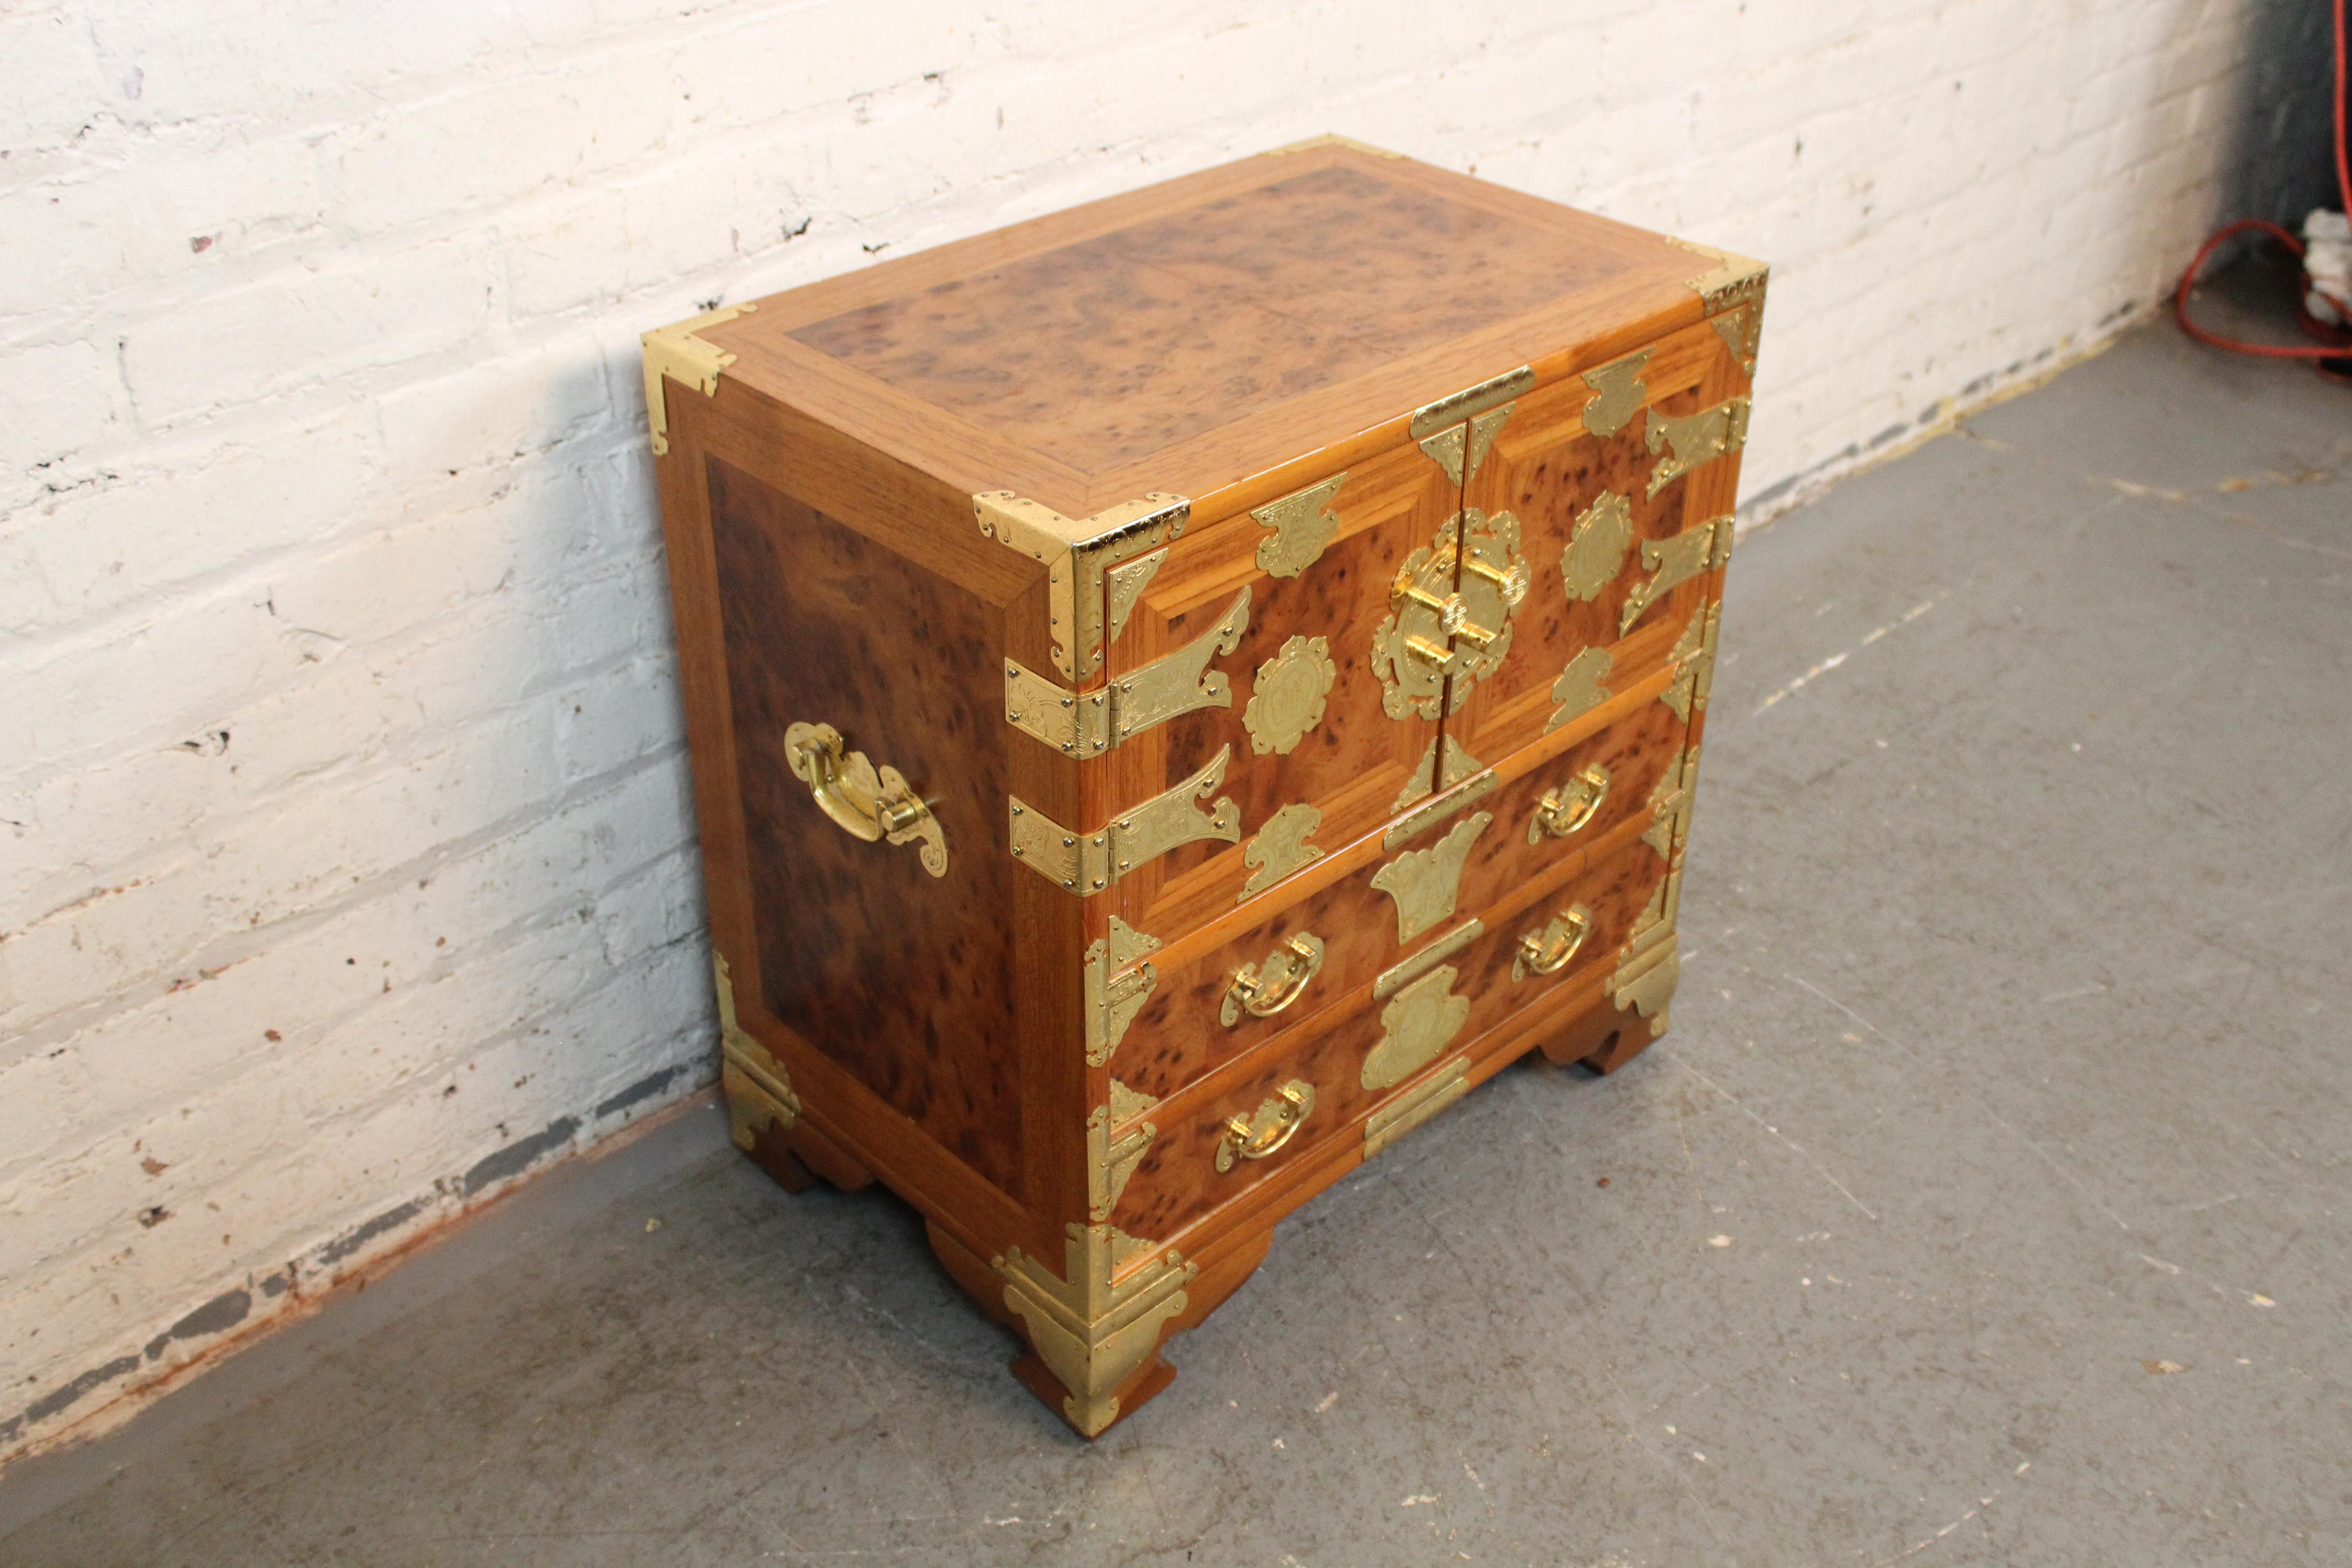 Bring home a sense of timeless adventure with this fantastic Asiatic burl wood tansu style chest. Upper double doors open to reveal a tidy cubby with two felt-lined, dovetailed drawers, while an additional pair of larger drawers sit underneath to